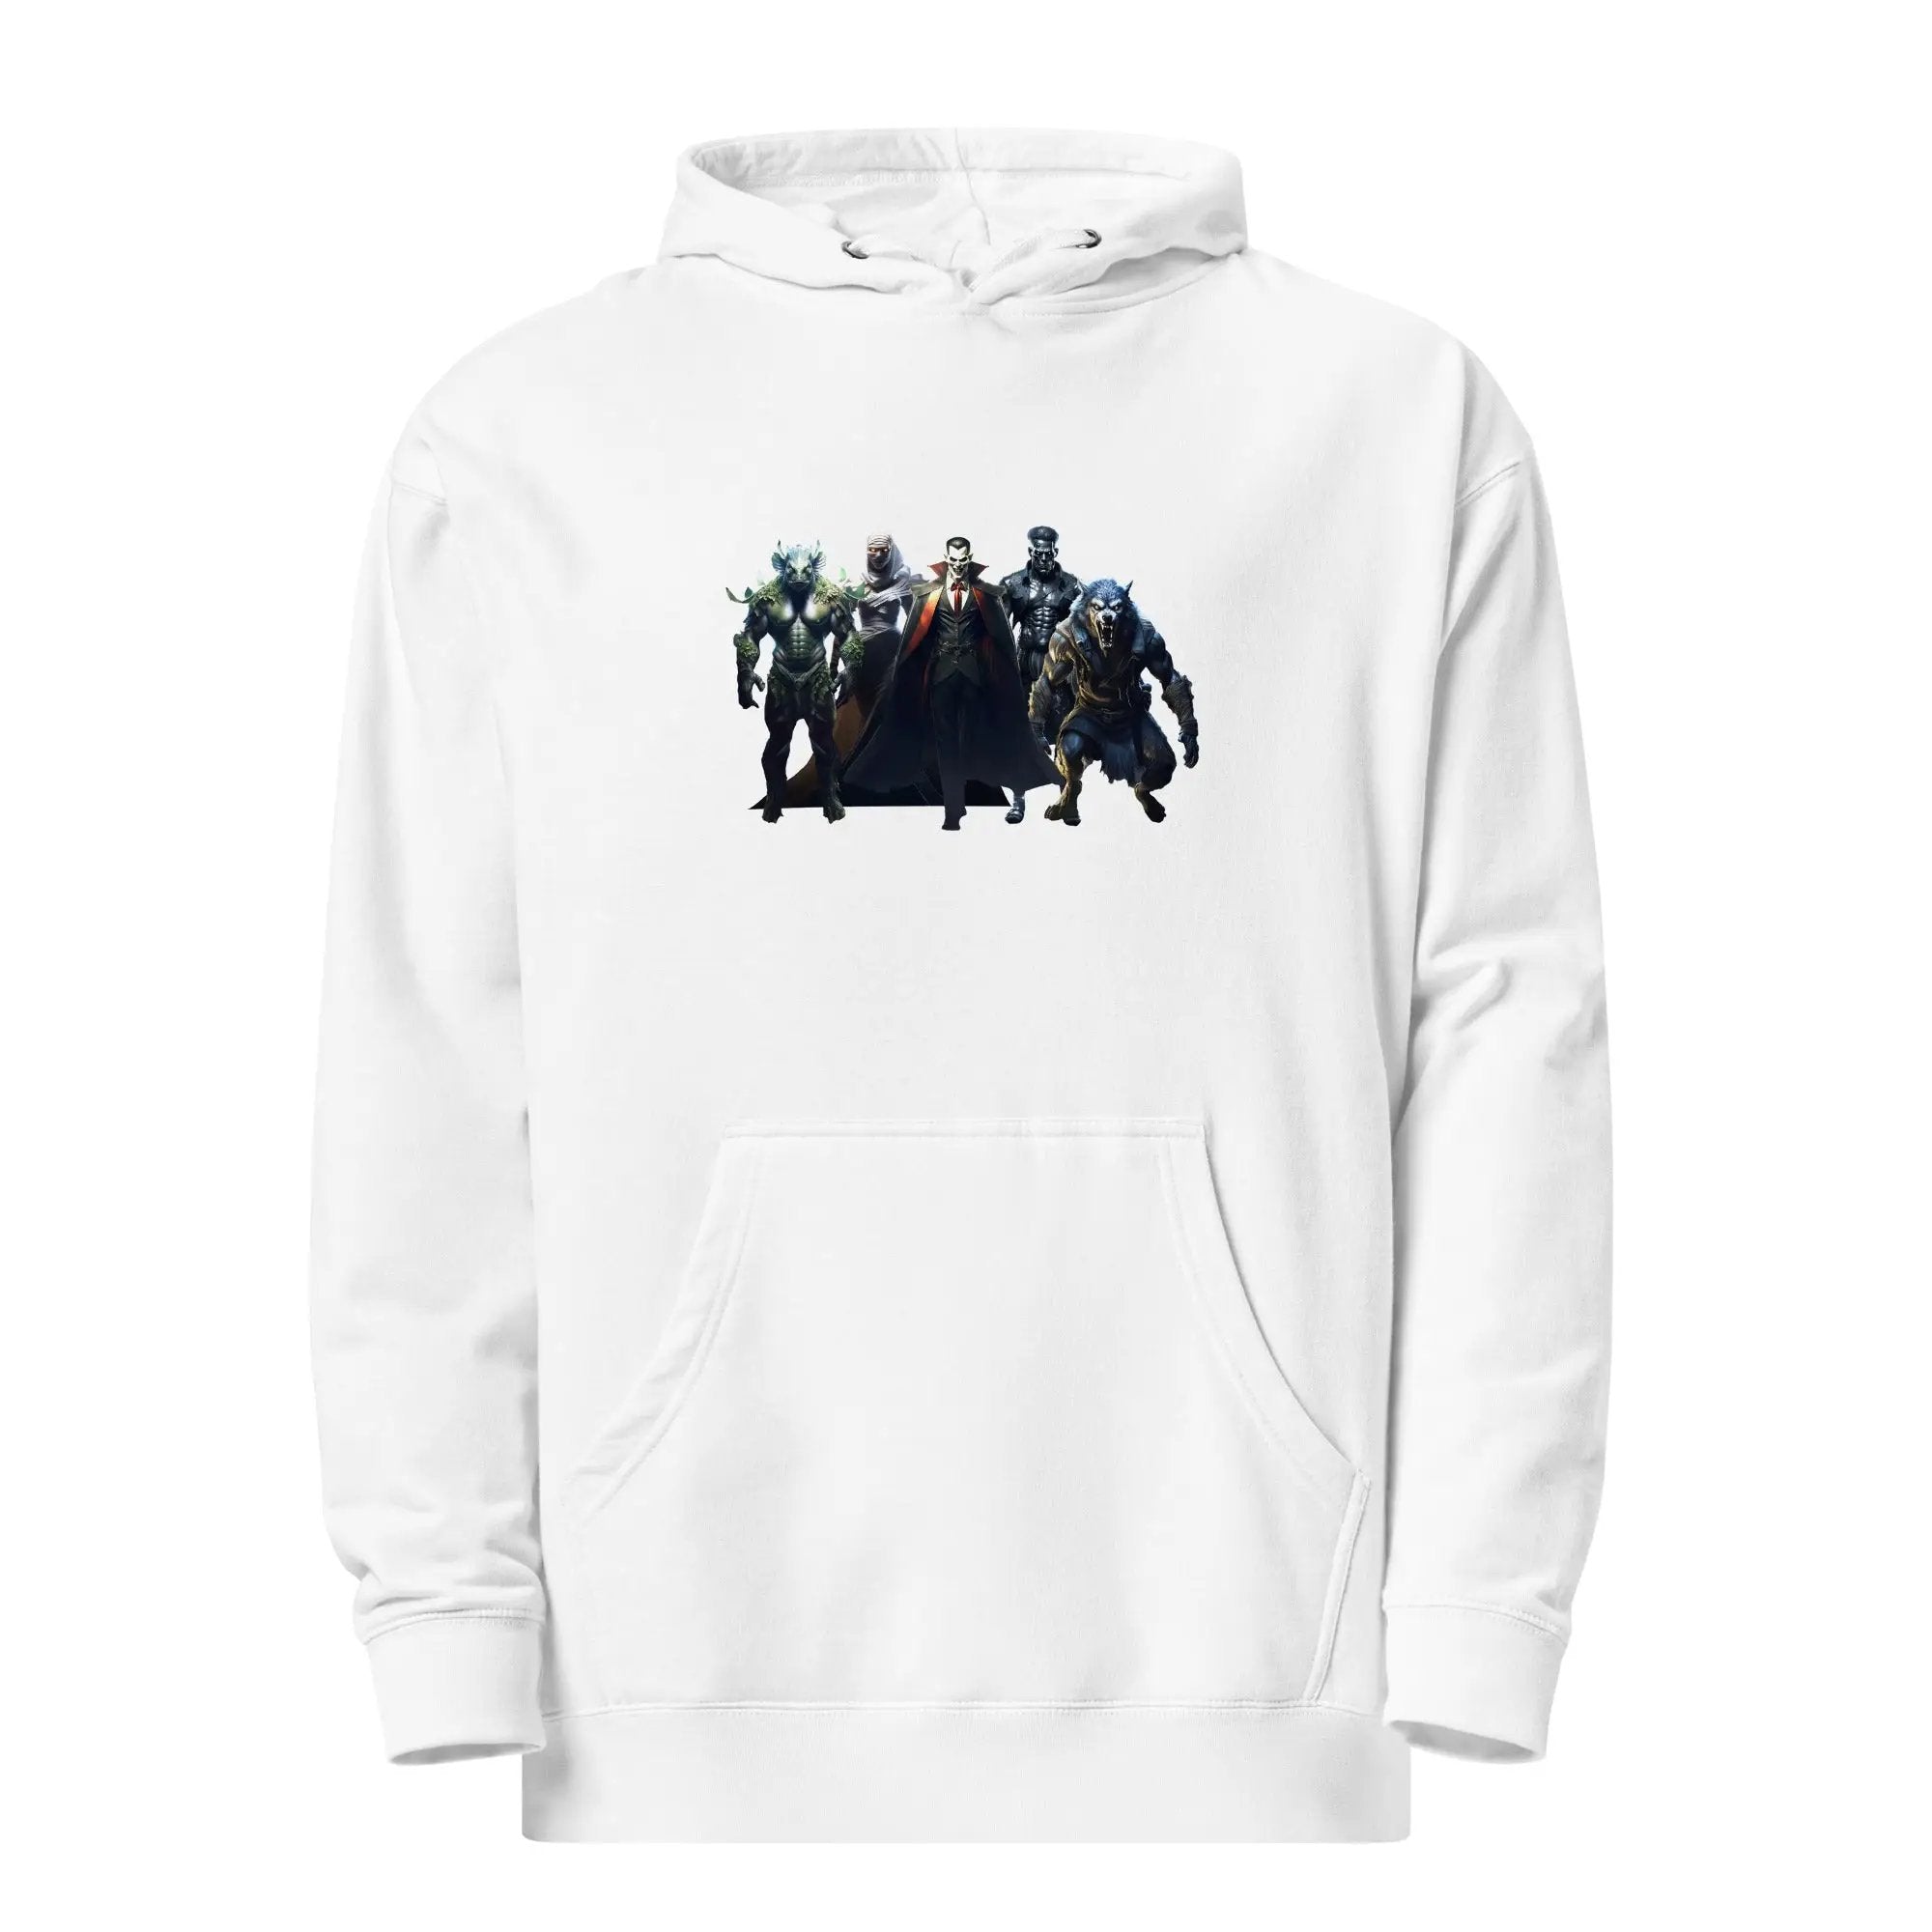 The Monster Squad Unisex midweight hoodie